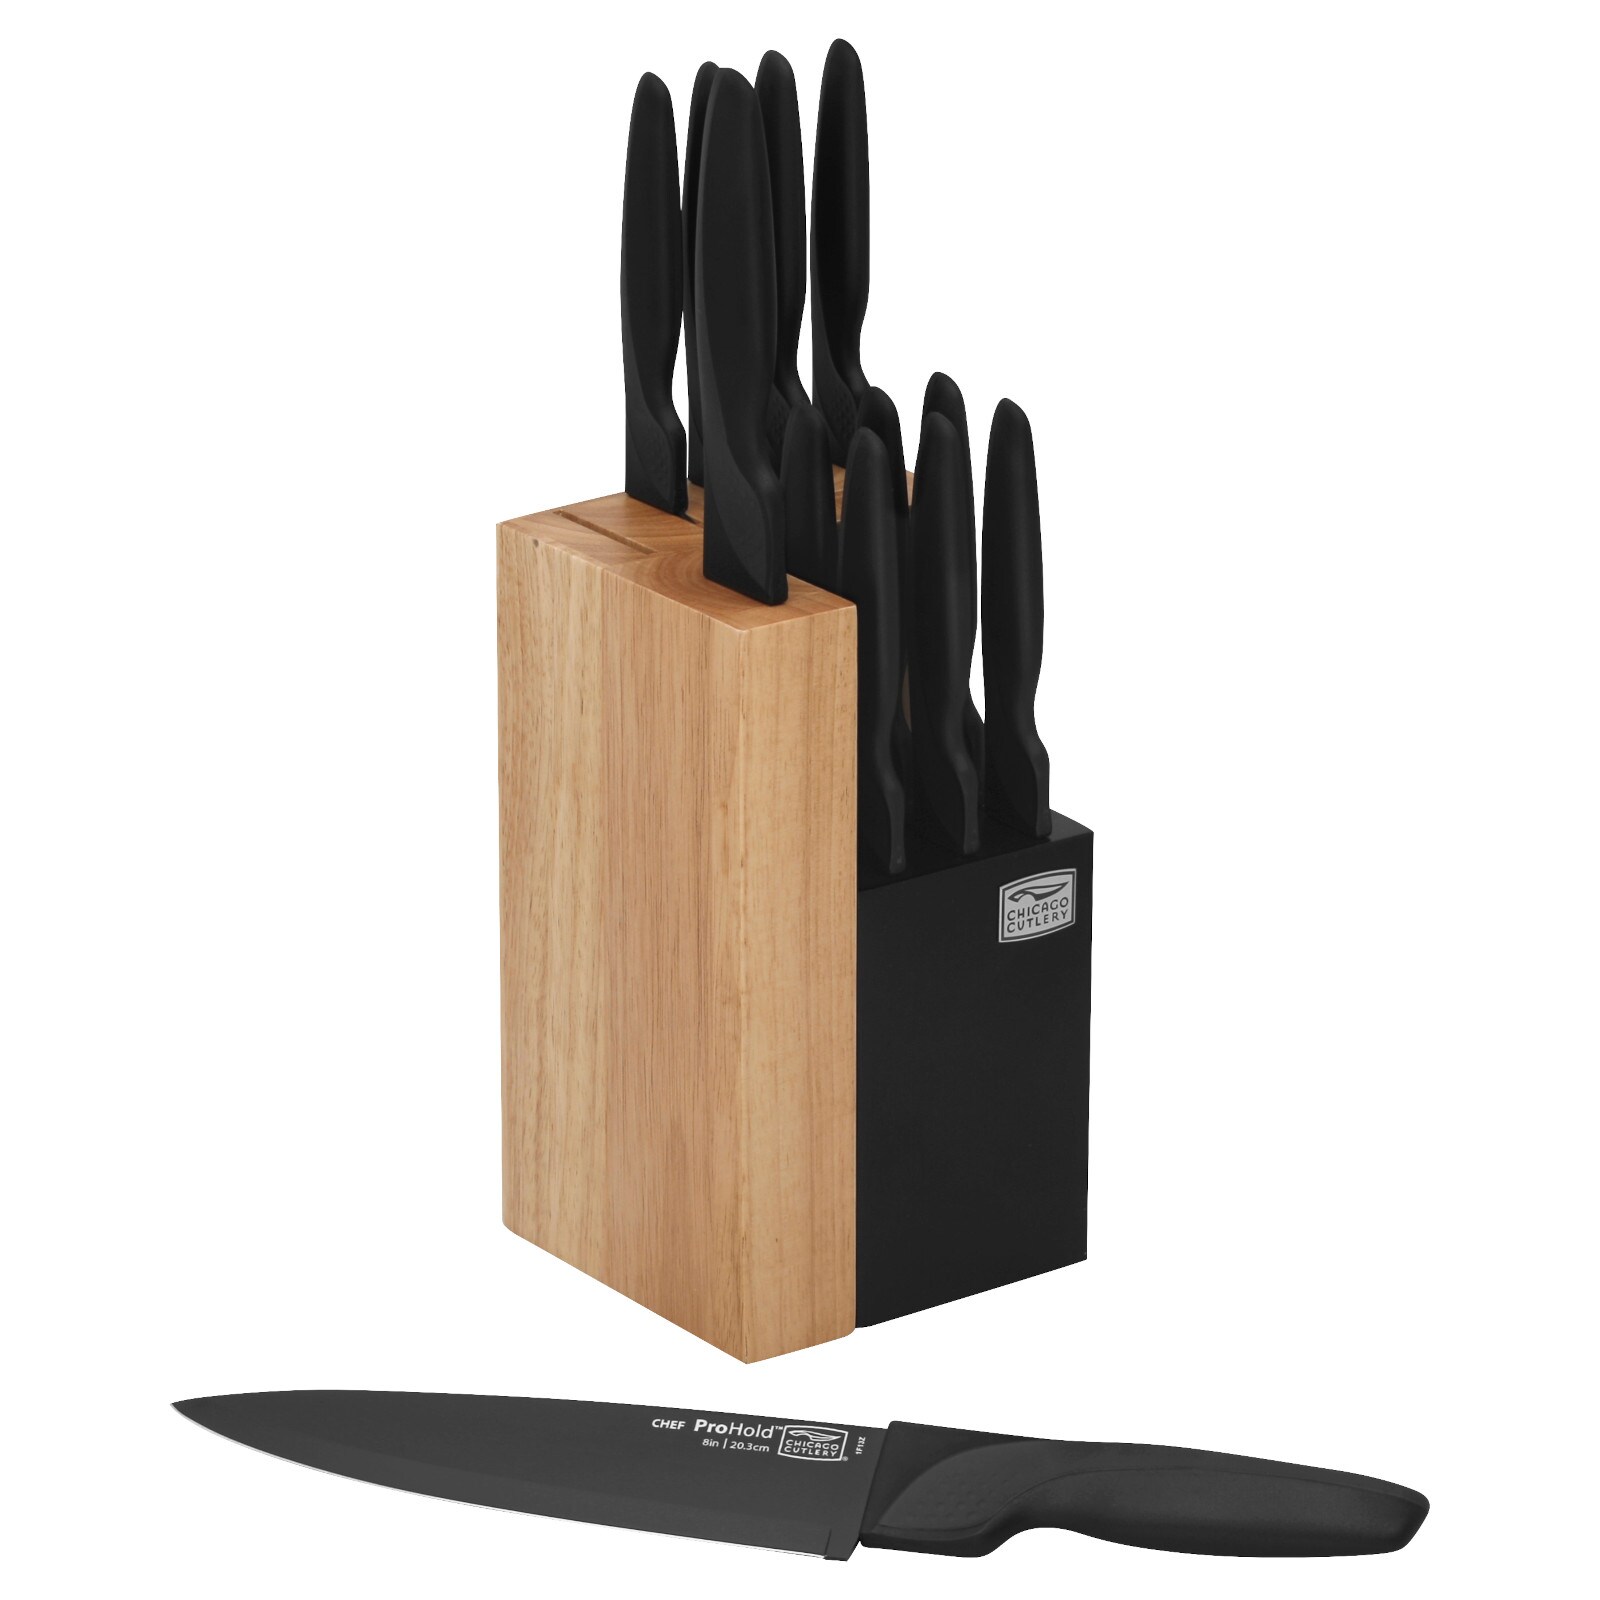 Chicago Cutlery Avondale 3.5 In. Parer Knife, Cutlery, Household